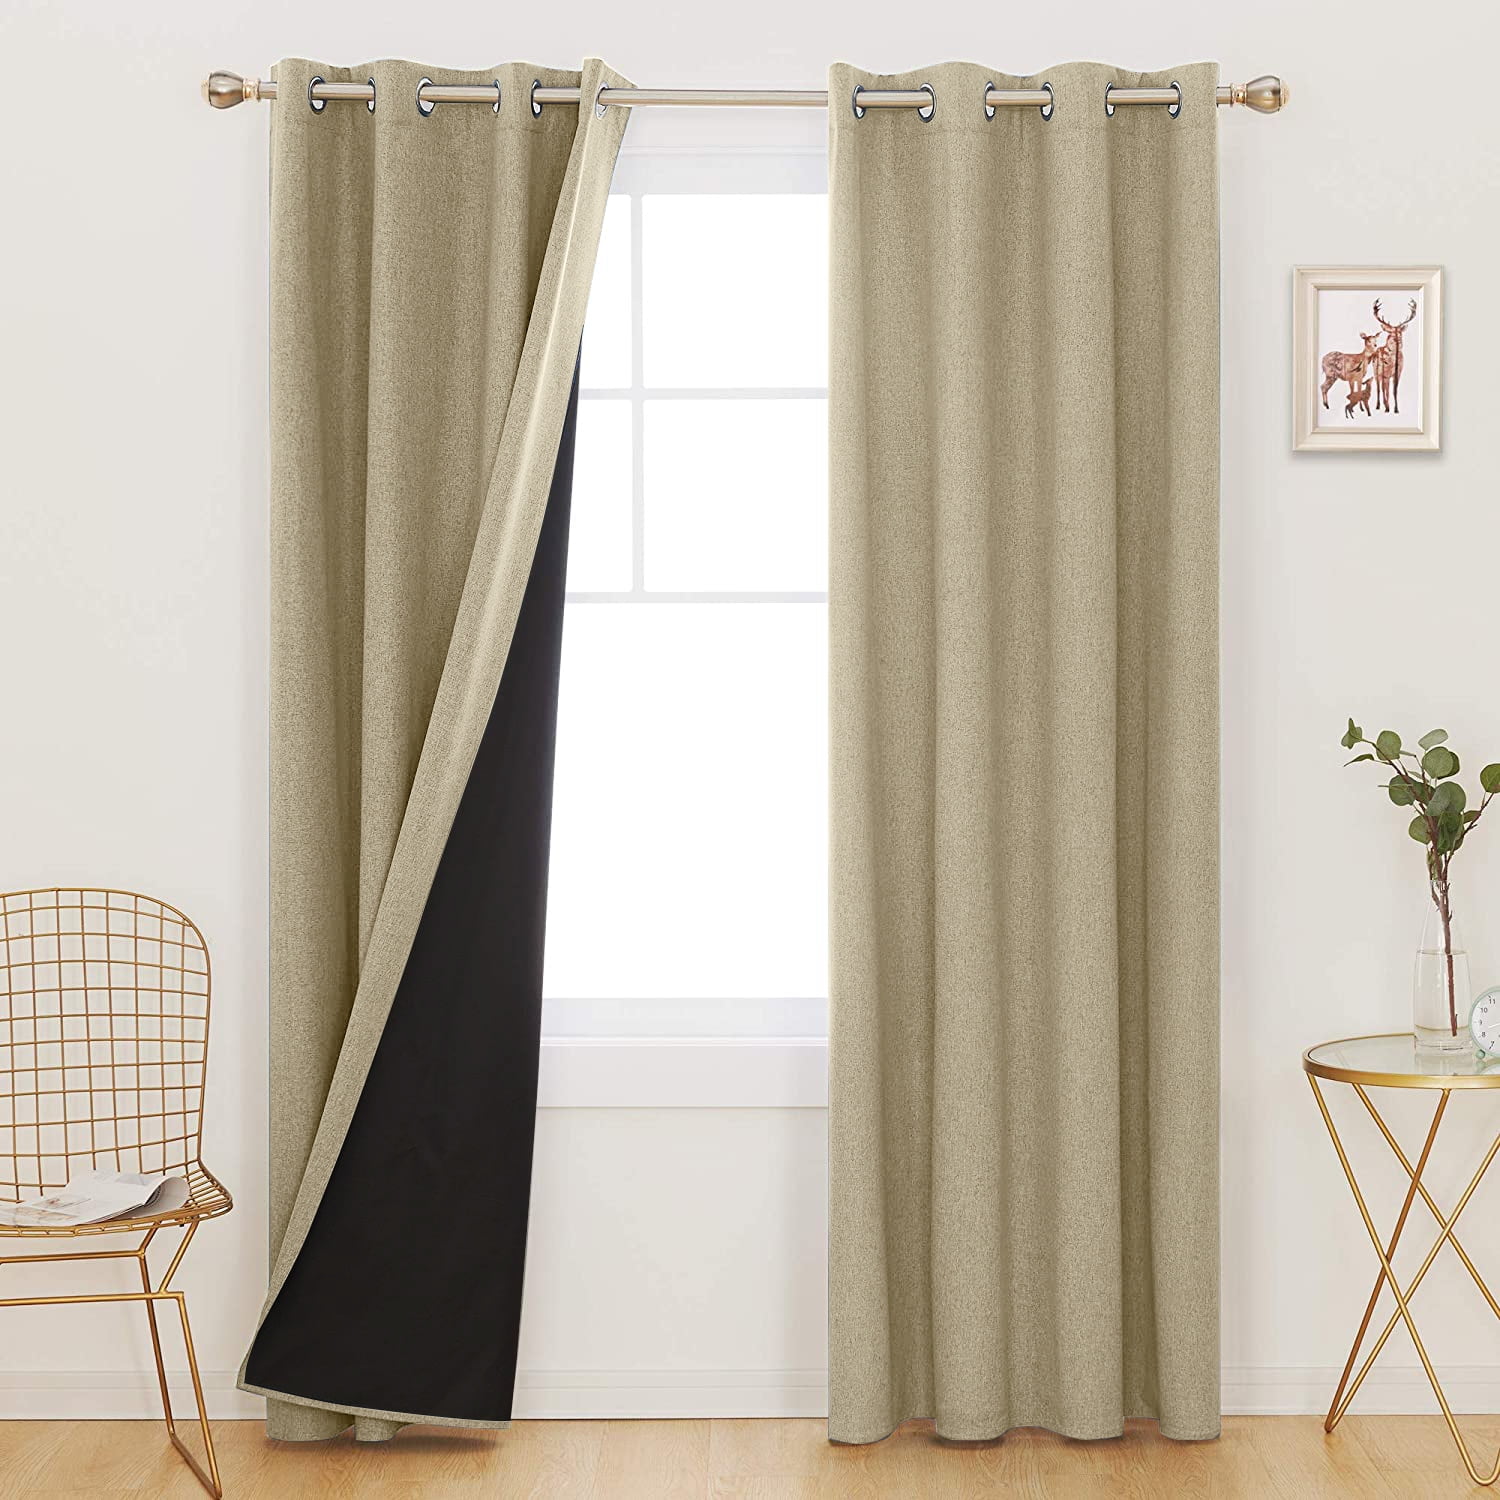 Harry Potter Thicken Solid Blackout Curtain Panels Thermal Window Drapes 1 Pair 